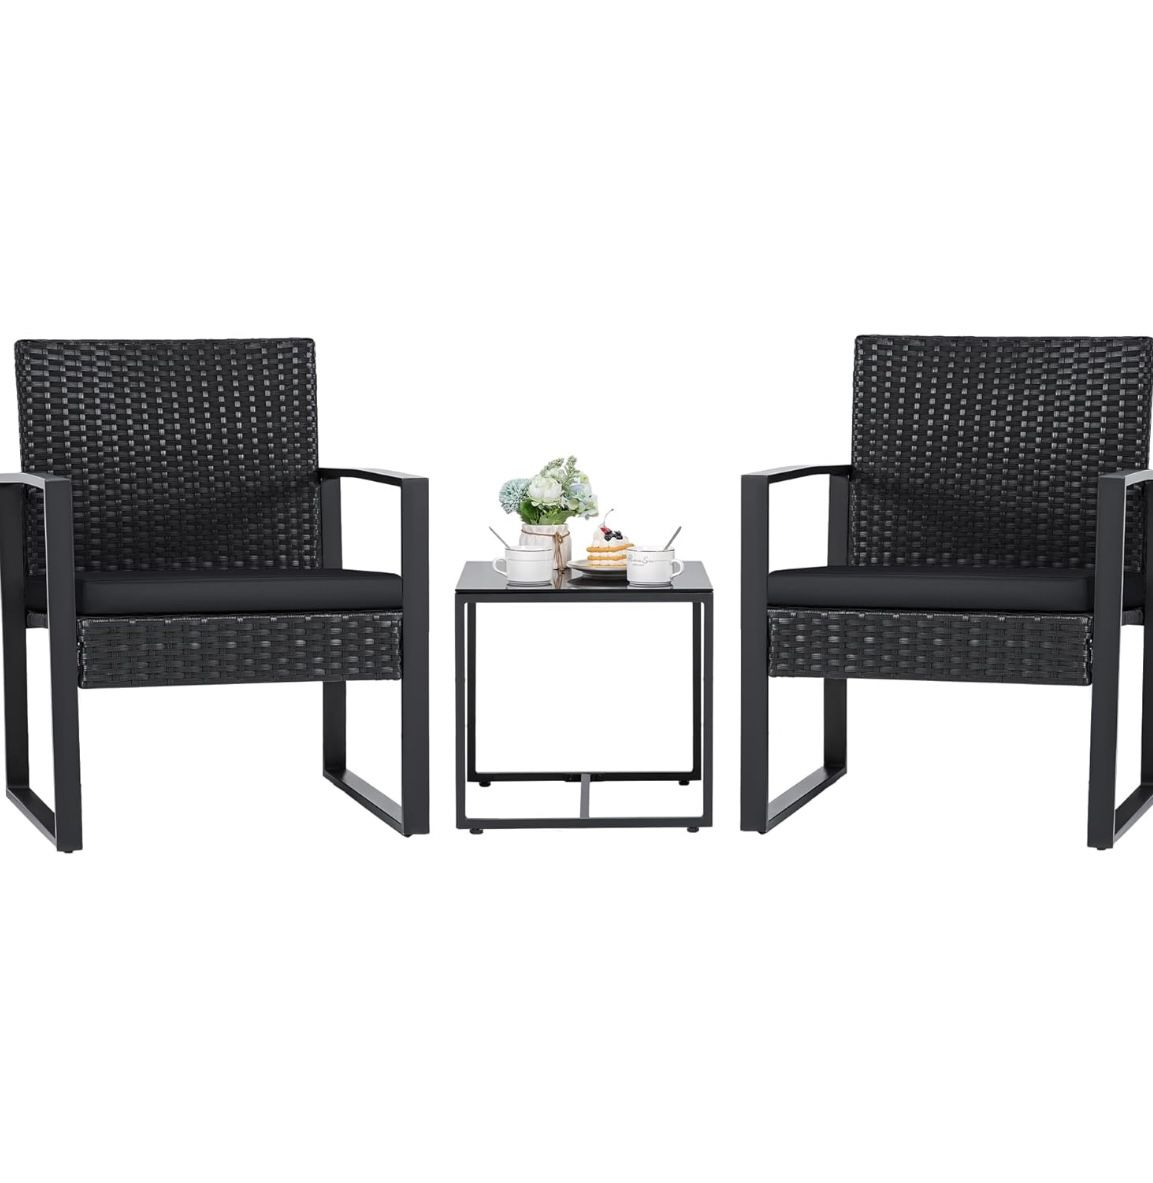 Outdoor Patio Furniture Set 3 Piece (brand New Never Opened)